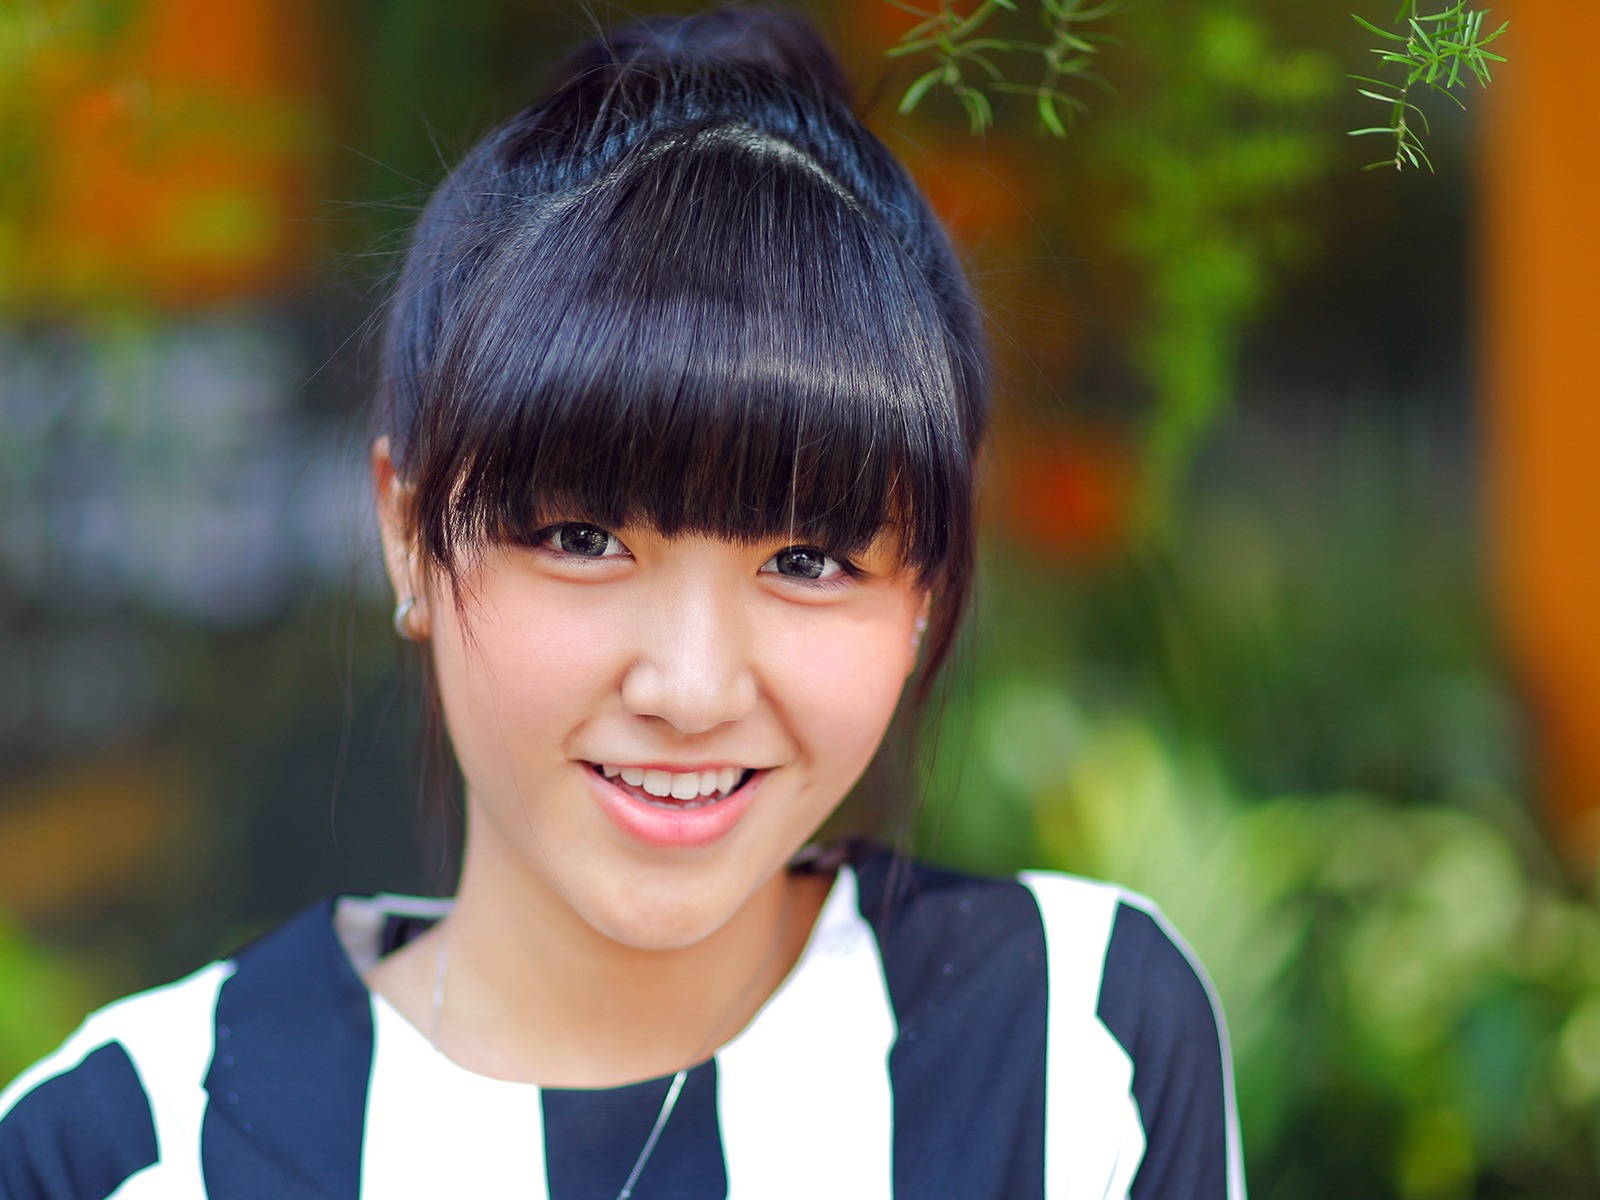 Pure and lovely young Asian girl HD wallpapers collection (4) #37 - 1600x1200